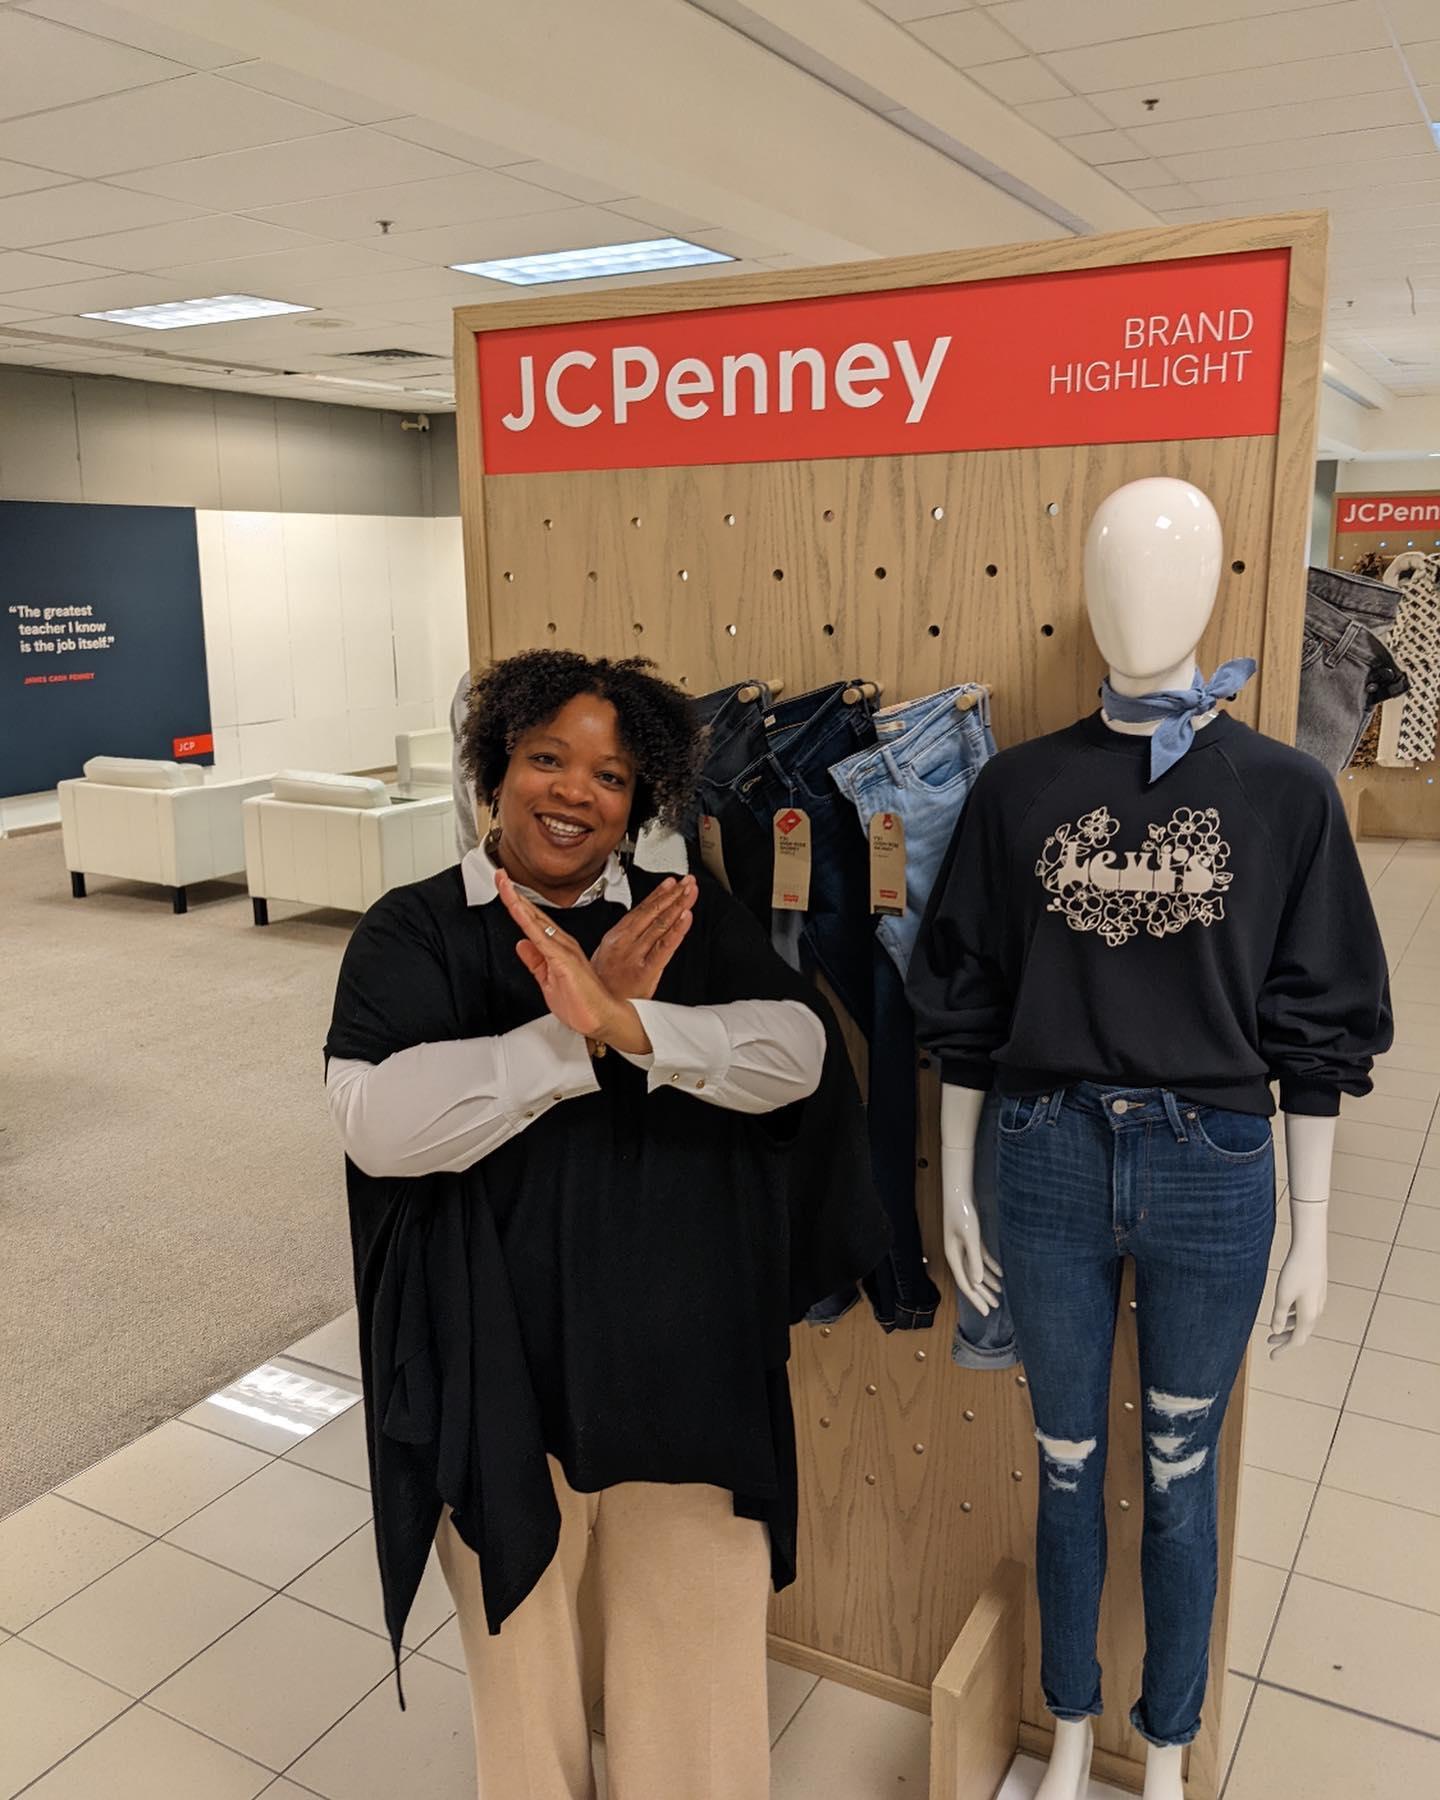 Is JCPenney Going Out of Business? Company Is Down, Not Out Yet